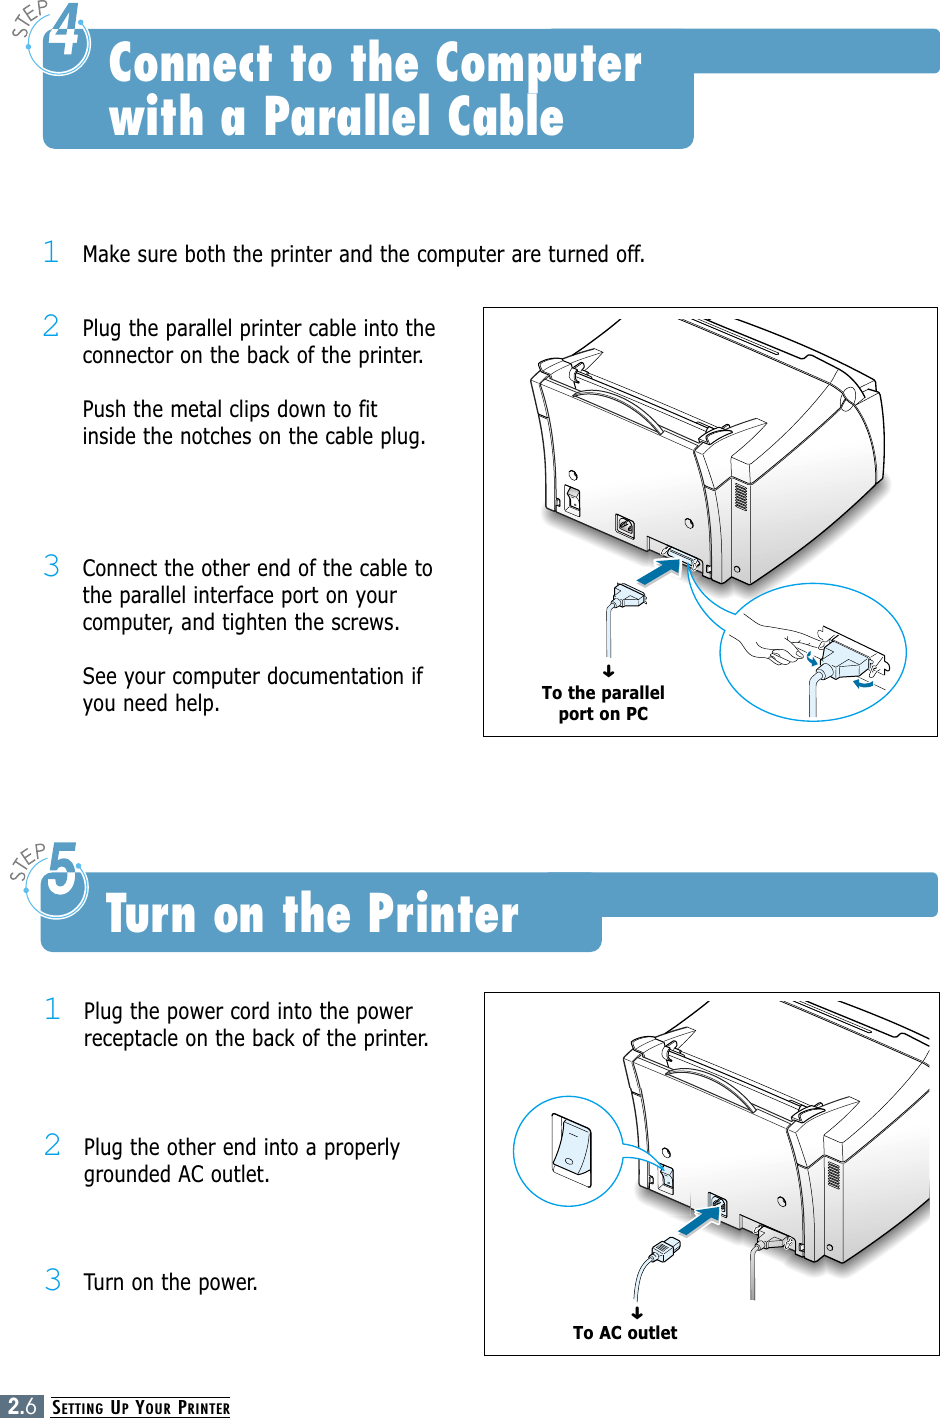 SETTING UPYOUR PRINTER2.6Connect to the Computer with a Parallel Cable1Plug the power cord into the powerreceptacle on the back of the printer.2Plug the other end into a properlygrounded AC outlet.3Turn on the power.Turn on the PrinterTo AC outlet➜1Make sure both the printer and the computer are turned off.2Plug the parallel printer cable into theconnector on the back of the printer. Push the metal clips down to fitinside the notches on the cable plug.3Connect the other end of the cable tothe parallel interface port on yourcomputer, and tighten the screws. See your computer documentation ifyou need help.To the parallelport on PC➜